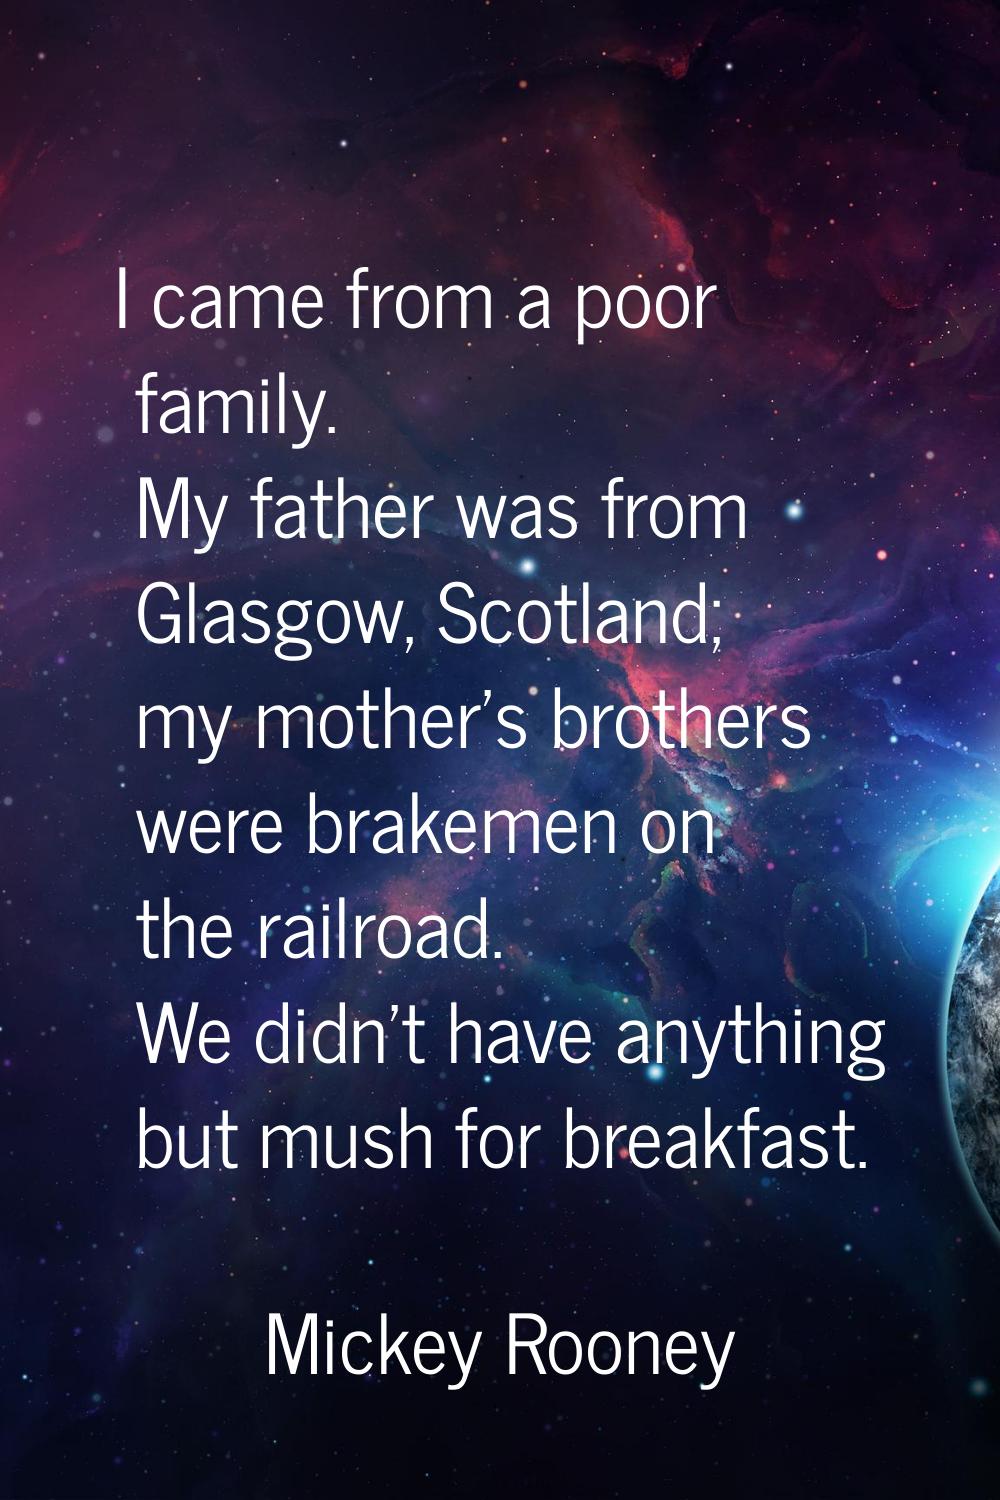 I came from a poor family. My father was from Glasgow, Scotland; my mother's brothers were brakemen